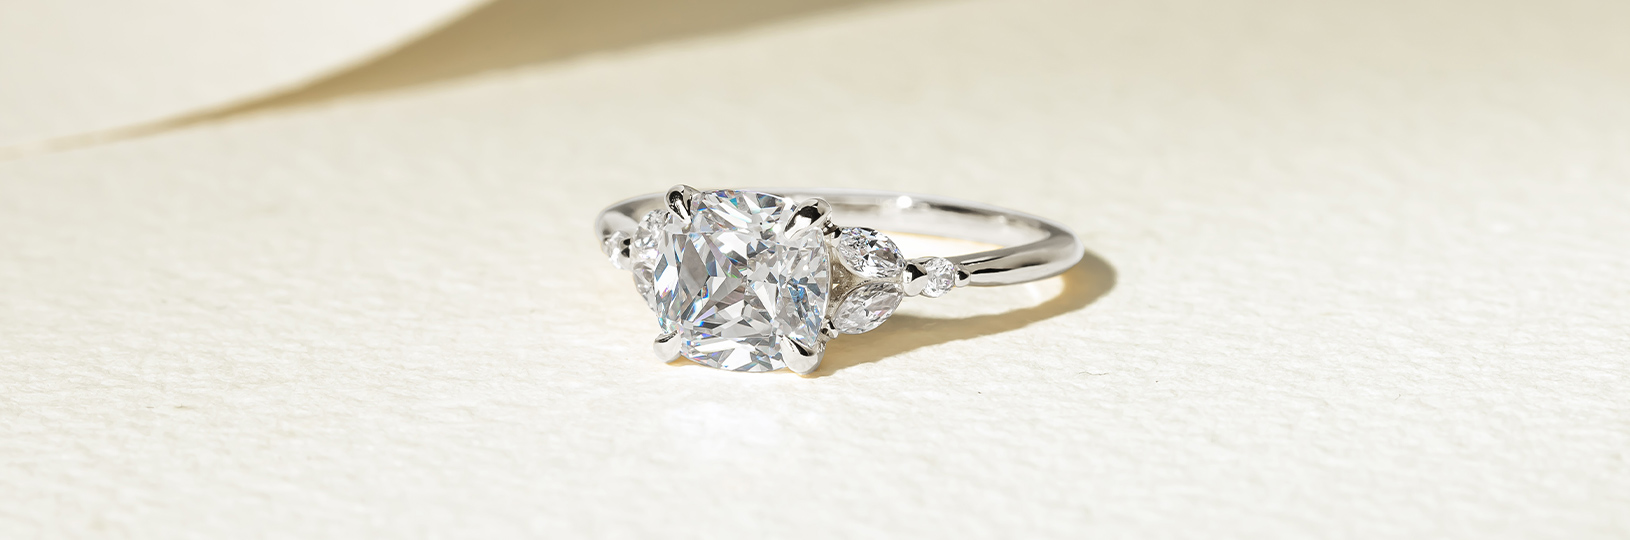 What Not to Use When Cleaning Your Diamond Ring?